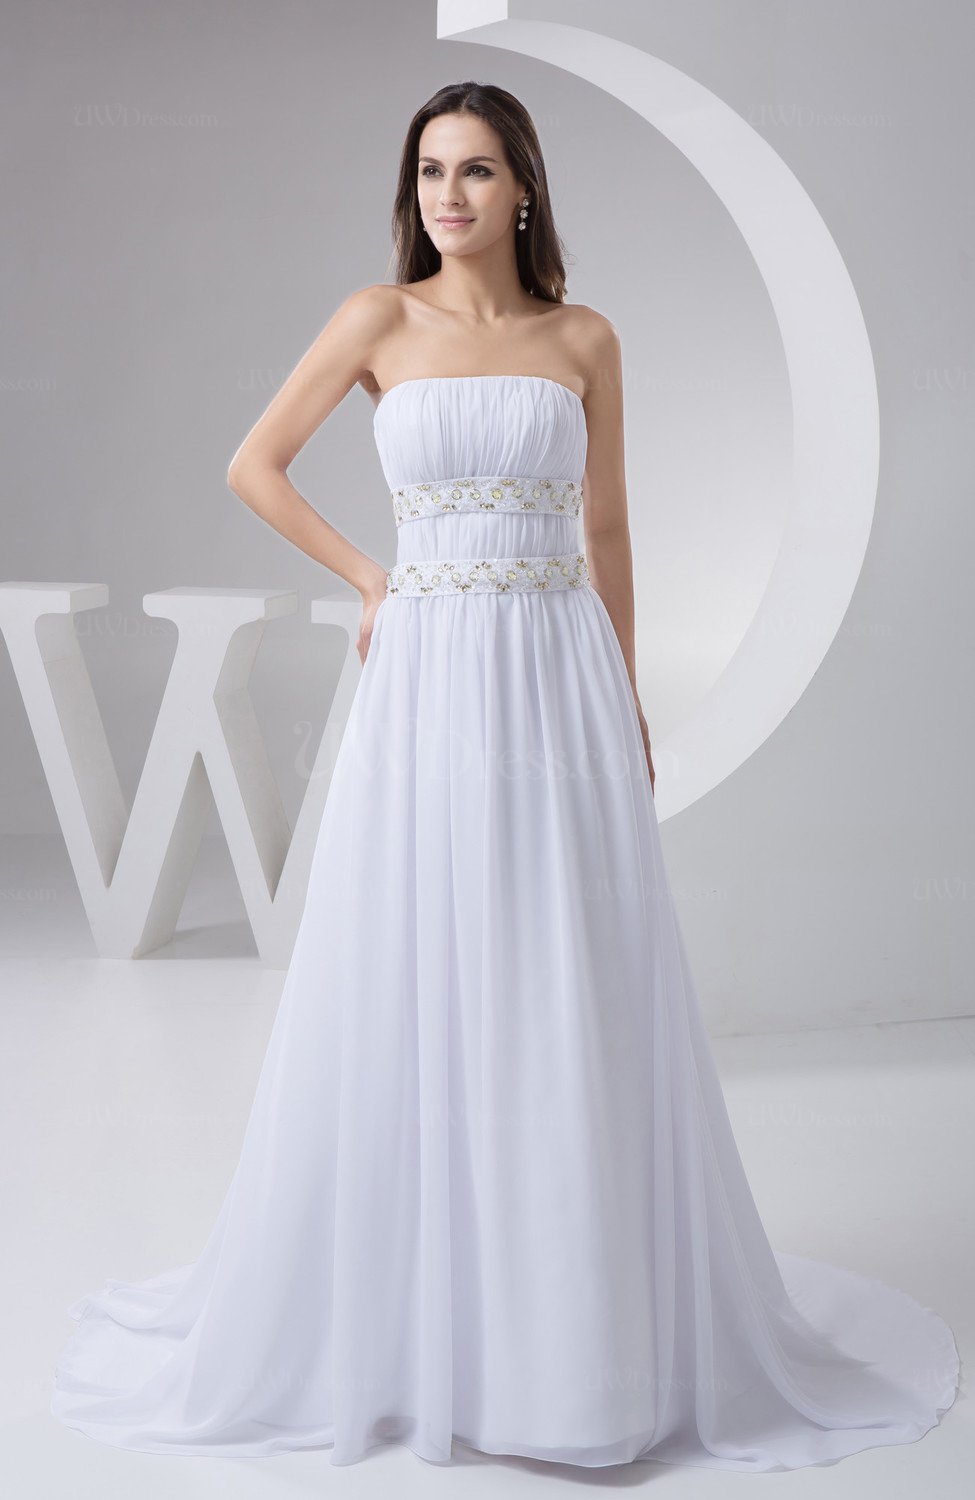 White Inexpensive Bridal Gowns Chiffon Beaded Cinderella Fall Country